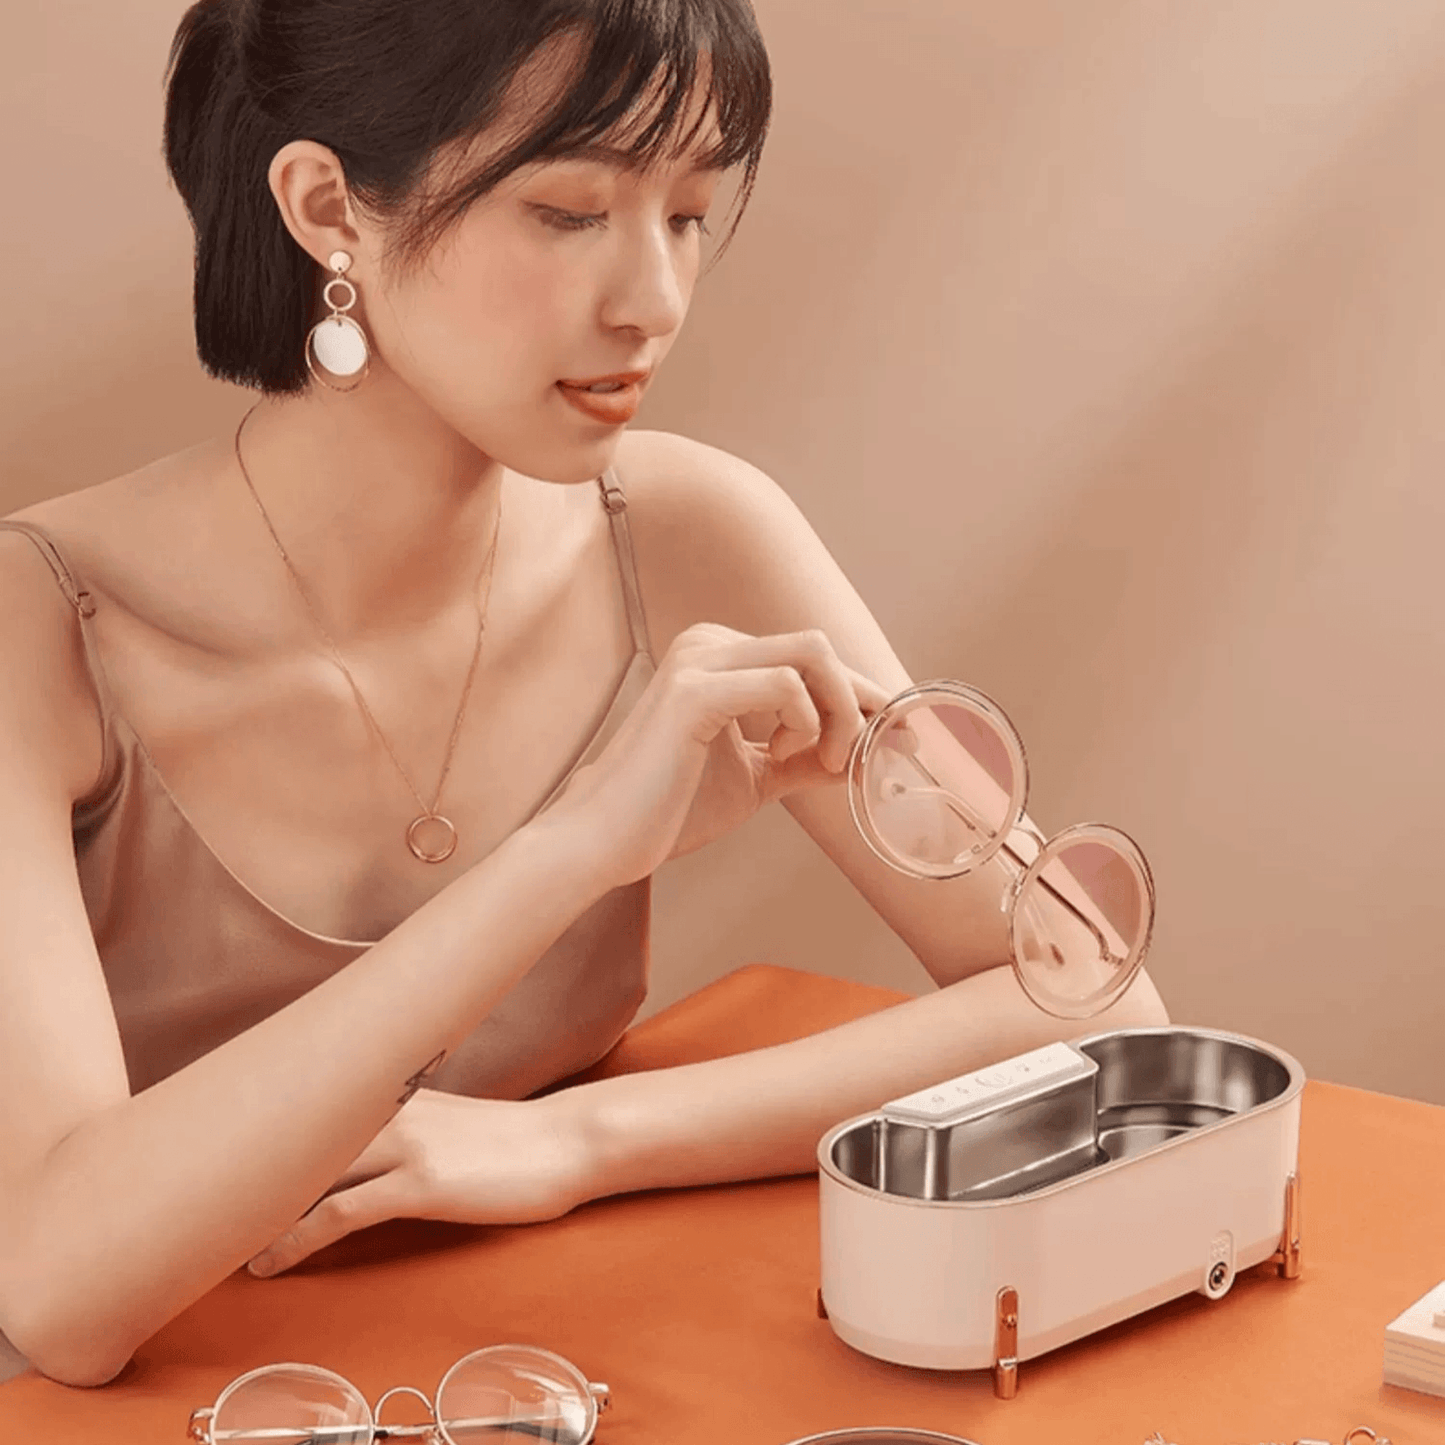 DAEWOO ULTRASONIC CLEANER FOR DENTAL BRACES, WATCHES, JEWELRY, DENTURE, EYE GLASSES COINS SILVER CLEANING